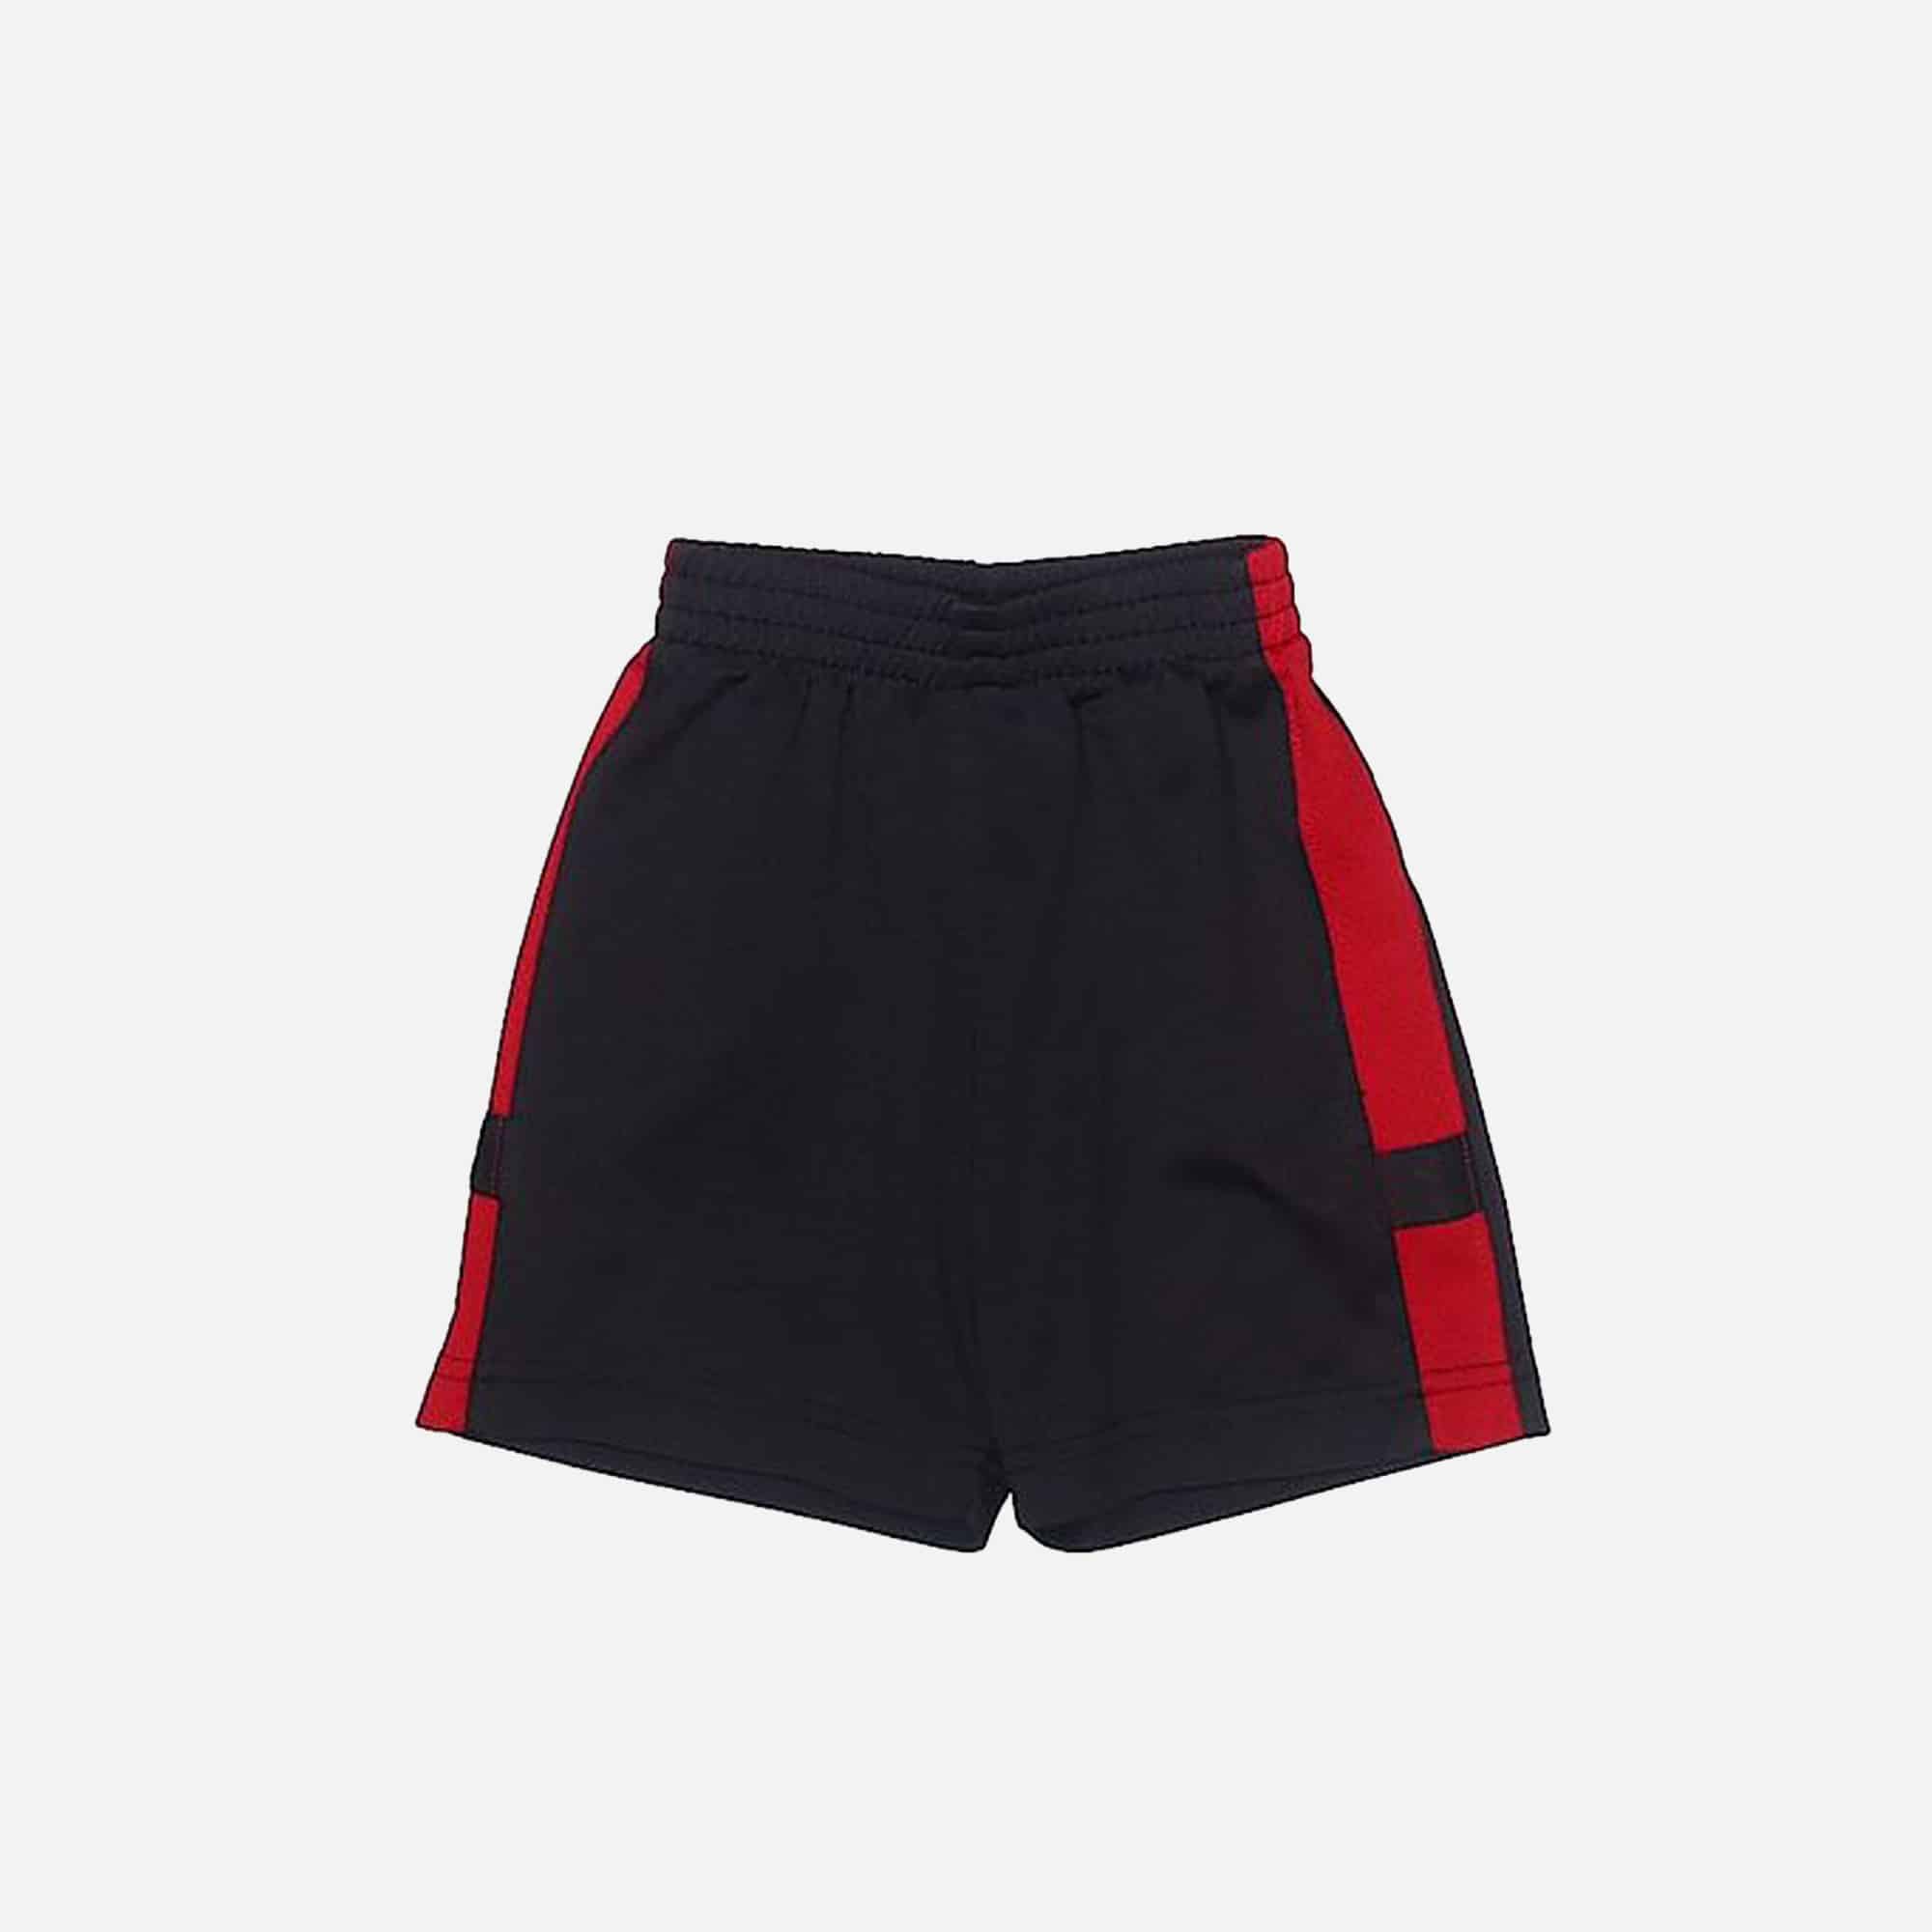 Spider Hero Look with this Smart Black shorts with red side panel details-RKFCBS001